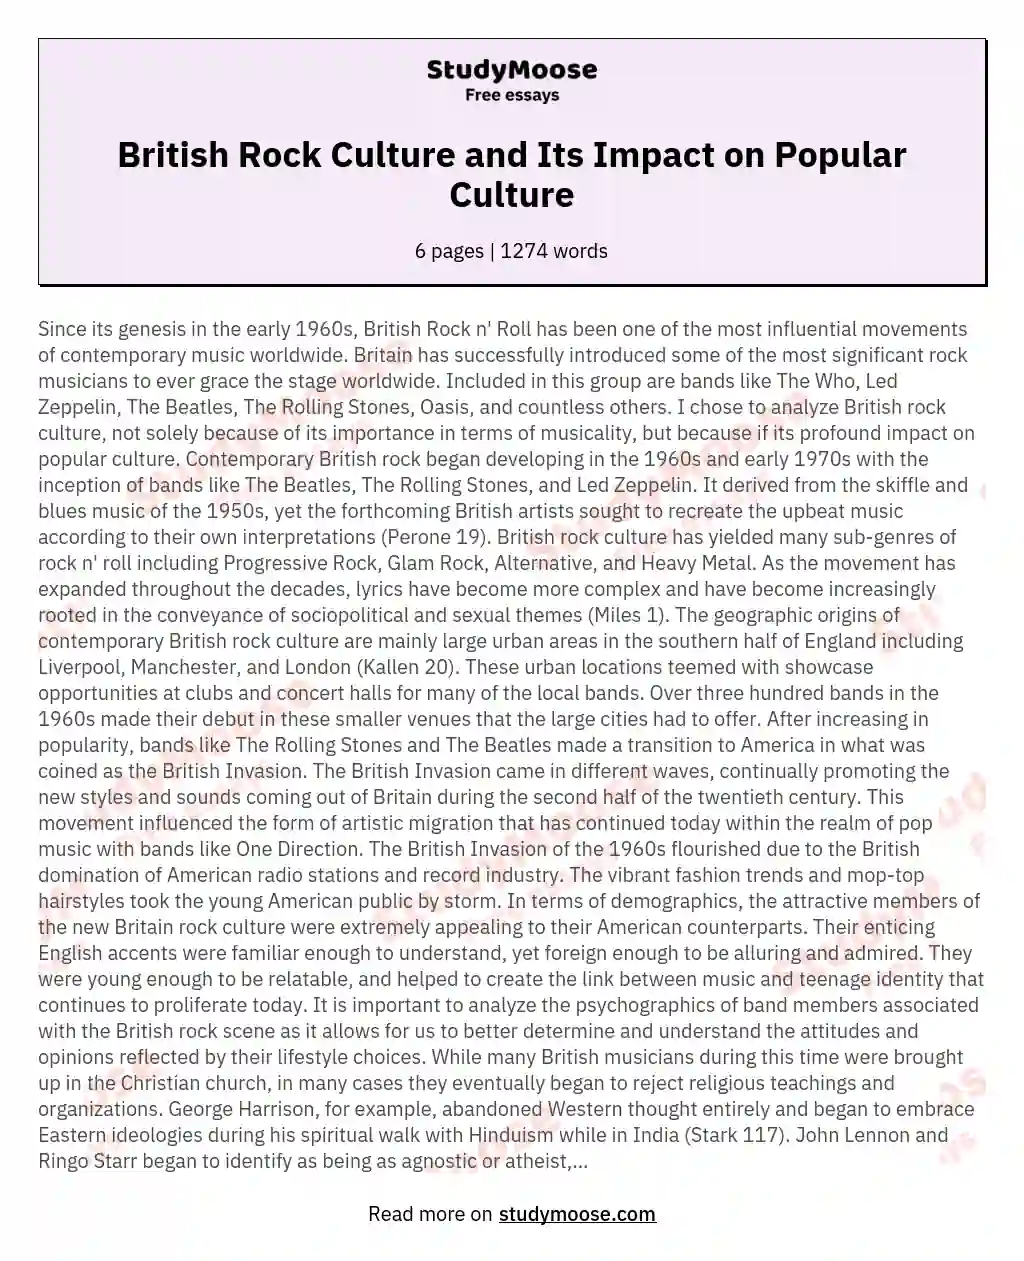 British Rock Culture and Its Impact on Popular Culture essay